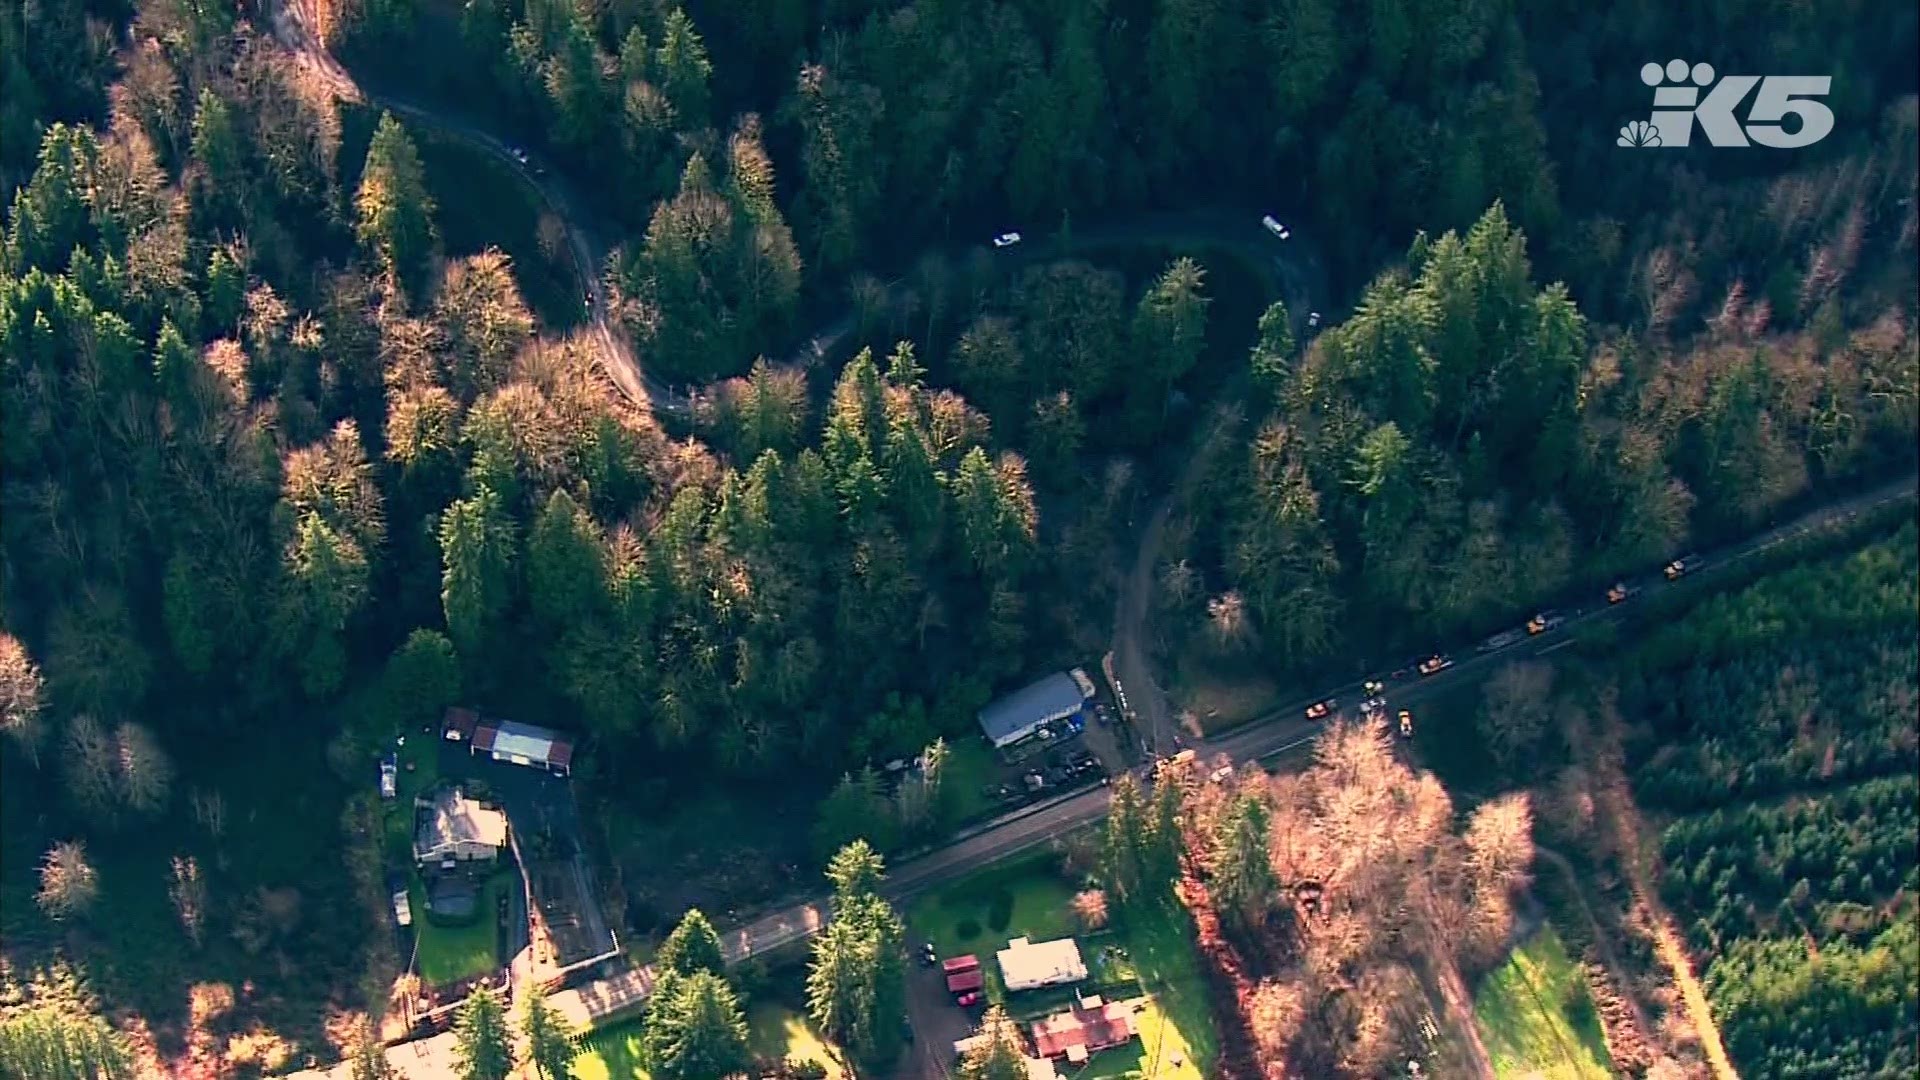 A mudslide damaged a private road near Monroe, isolating about 120 people.